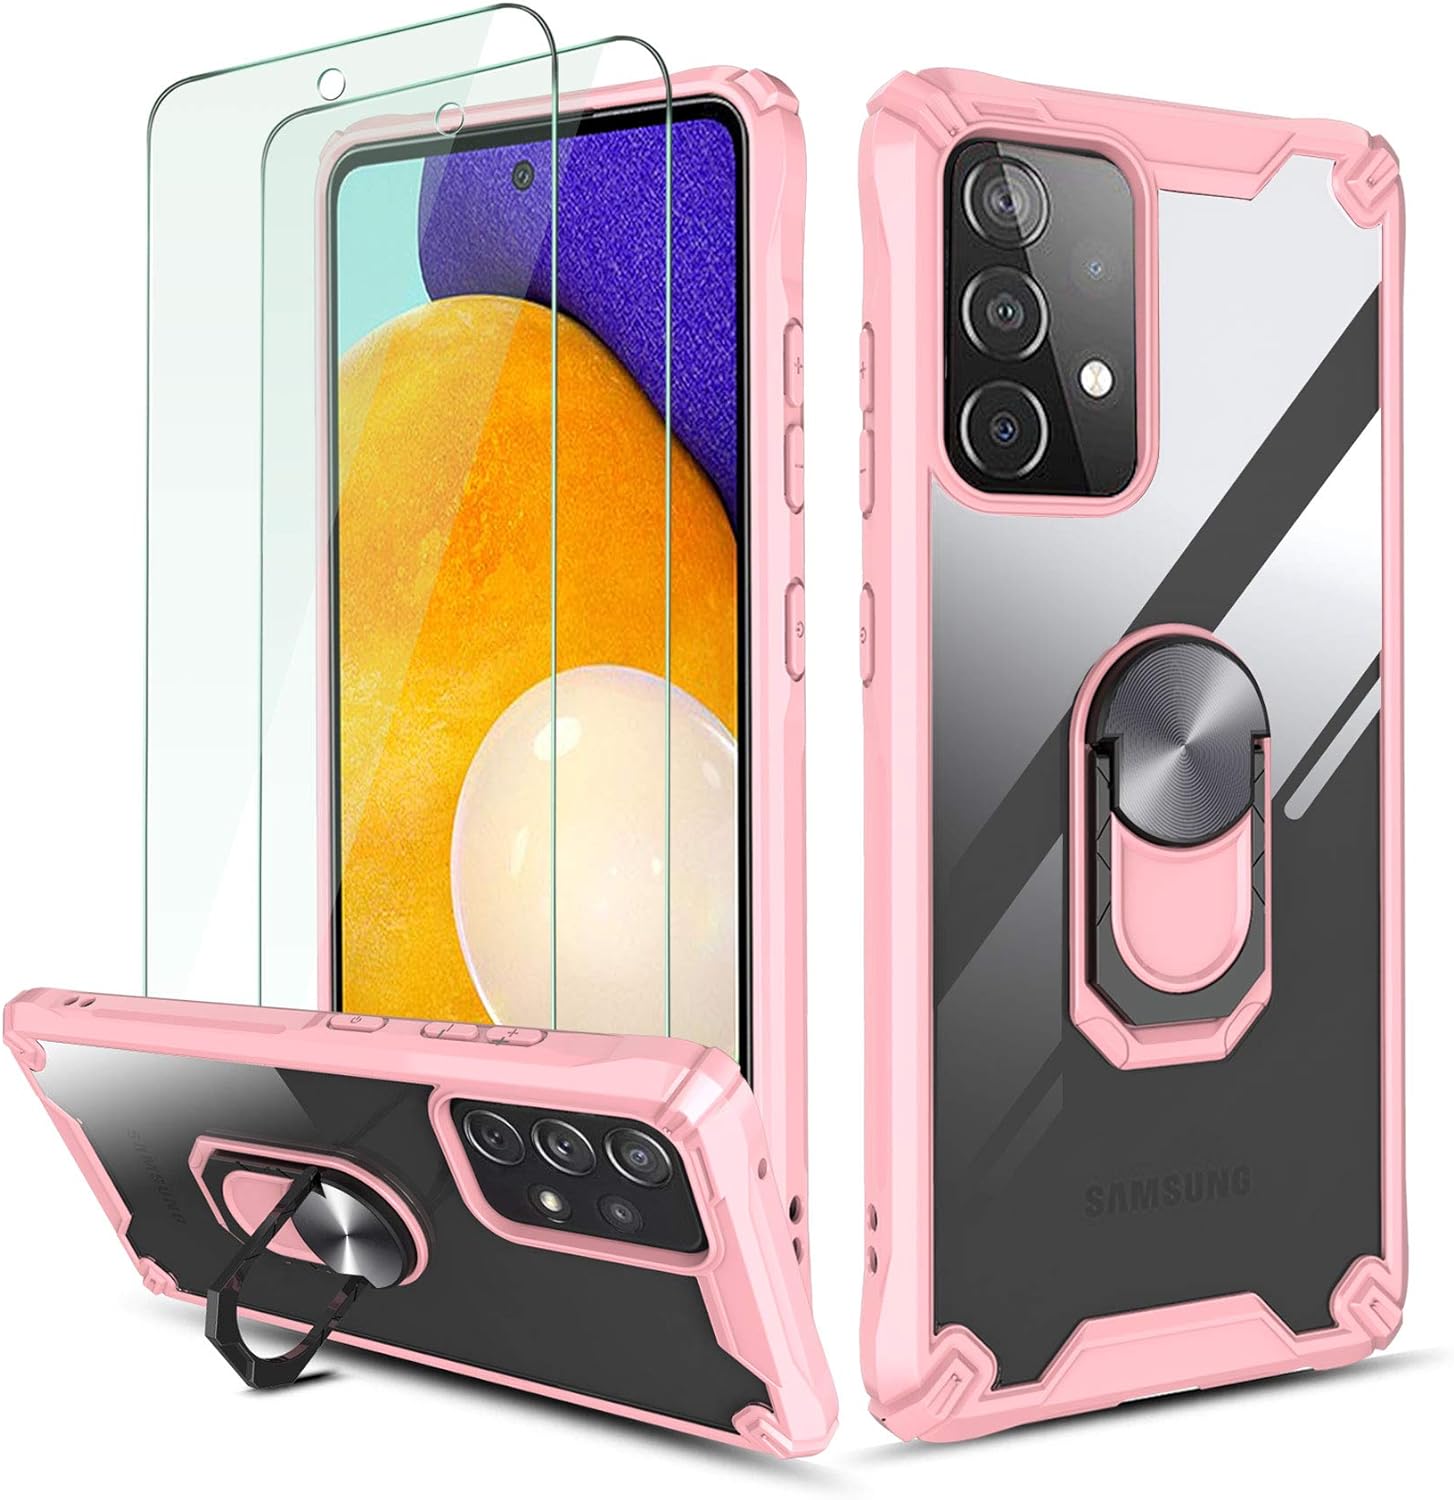 QHOHQ Case for Samsung Galaxy A52 4G/5G 6.5 with 2 Pack Screen Protector,[360 Rotating Stand] [5 Times Military Grade Anti-Fall Protection],Transparent PC Back Cover, Soft TPU Edge-Pink